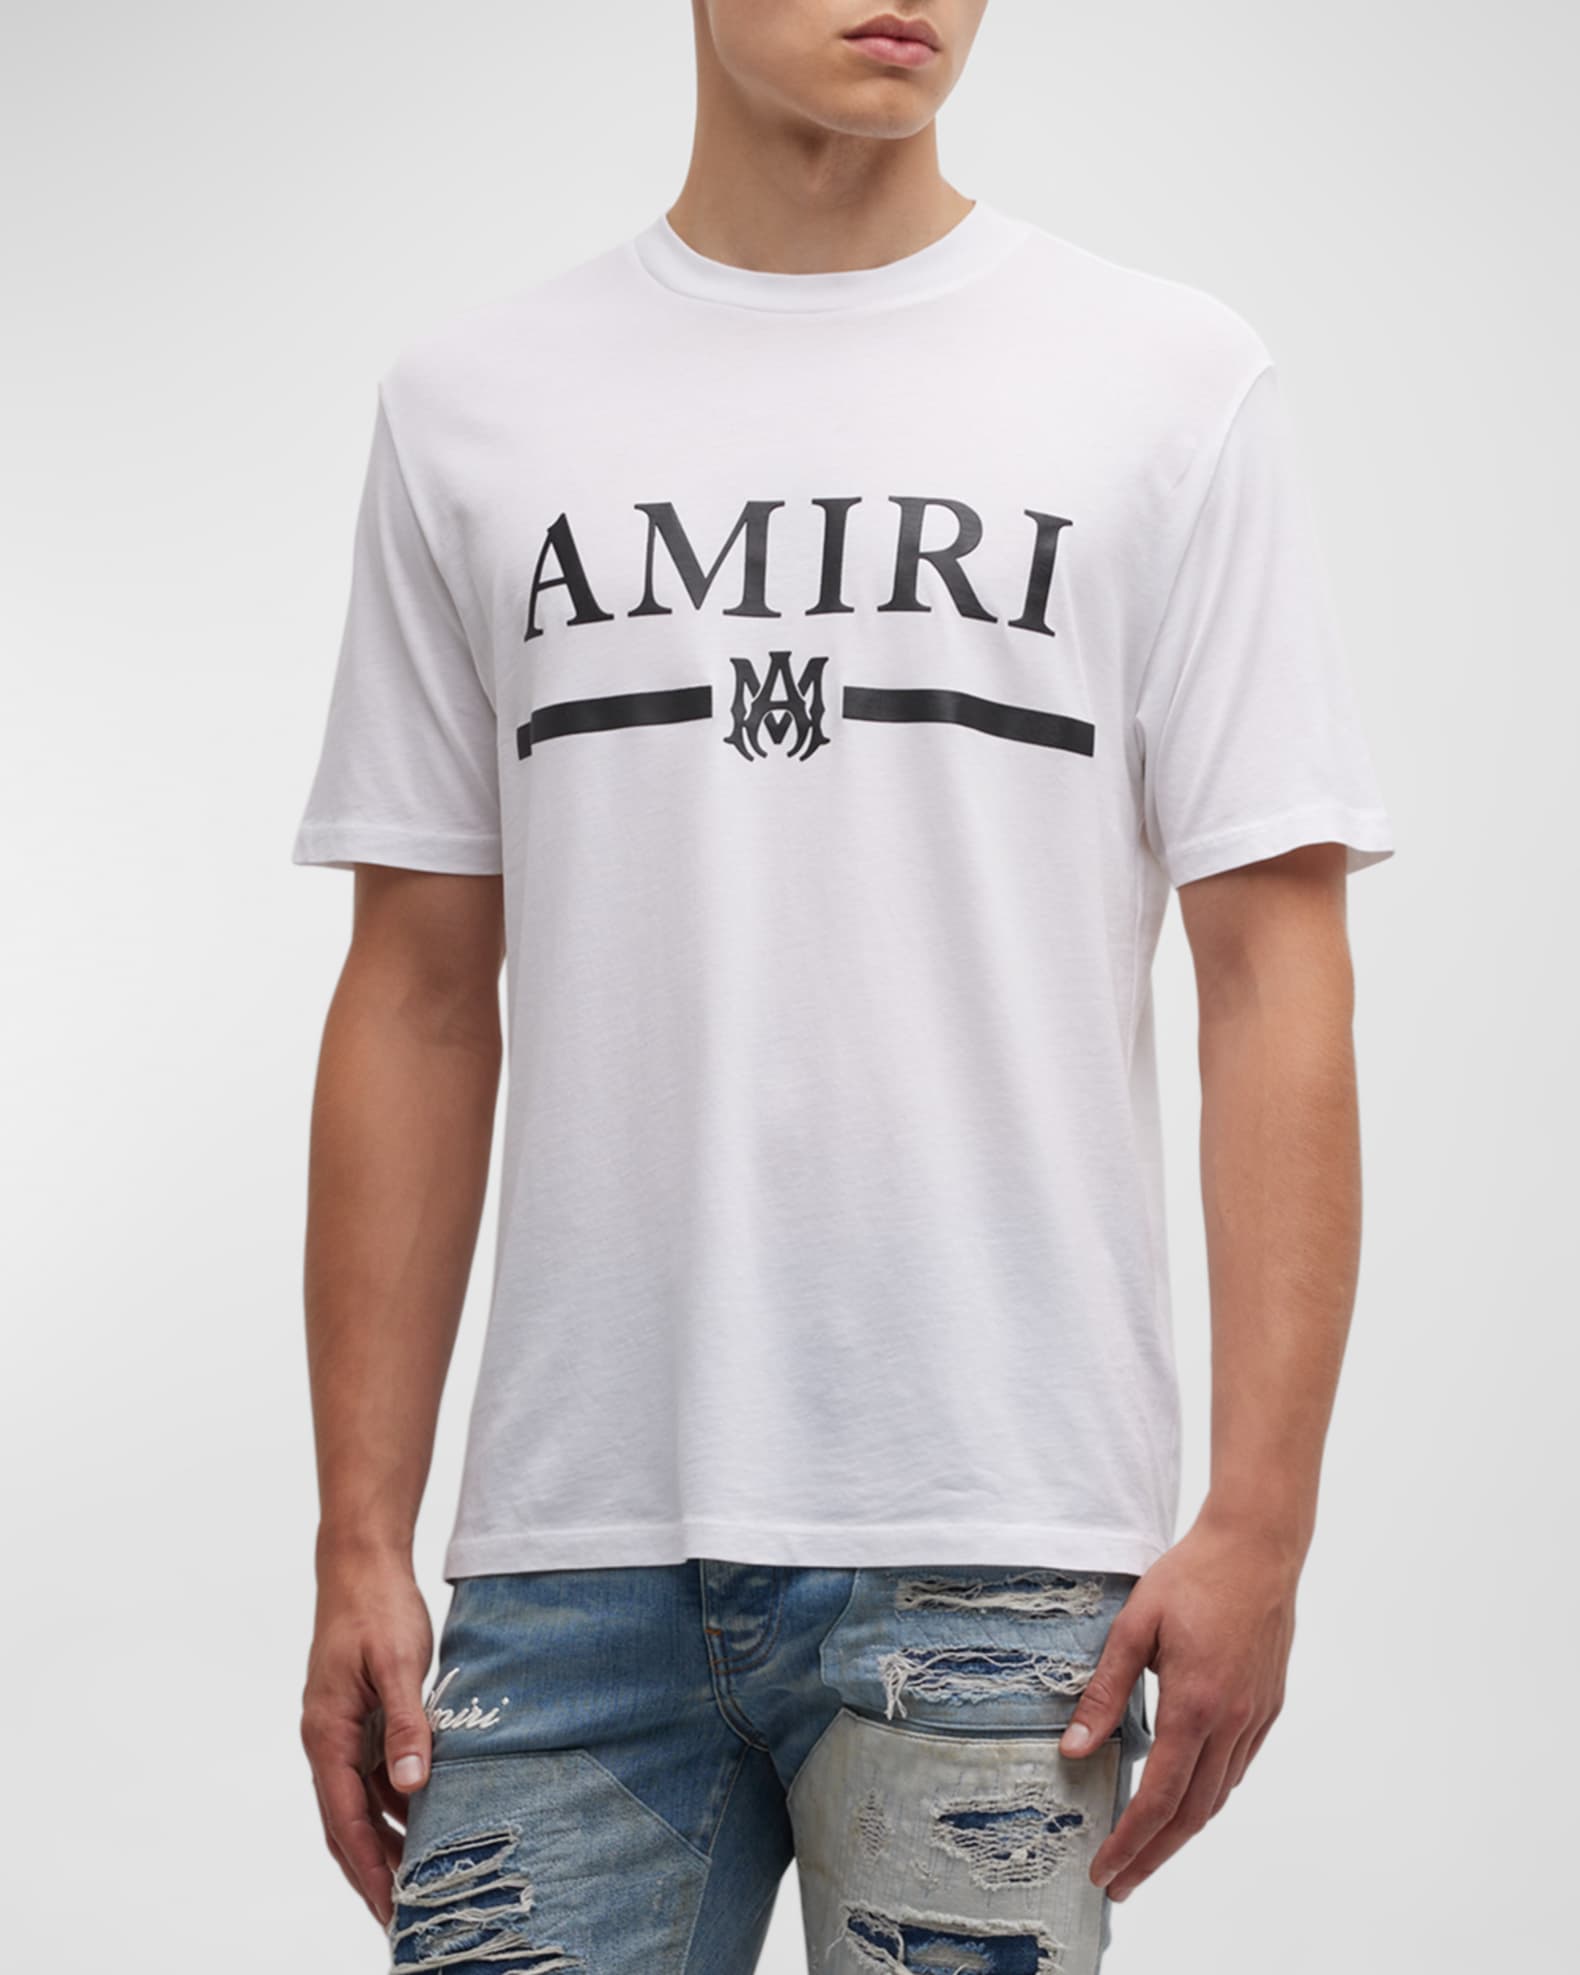 Men's luxury T-Shirt - Amiri T-Shirt in blue cotton with white lettering on  chest